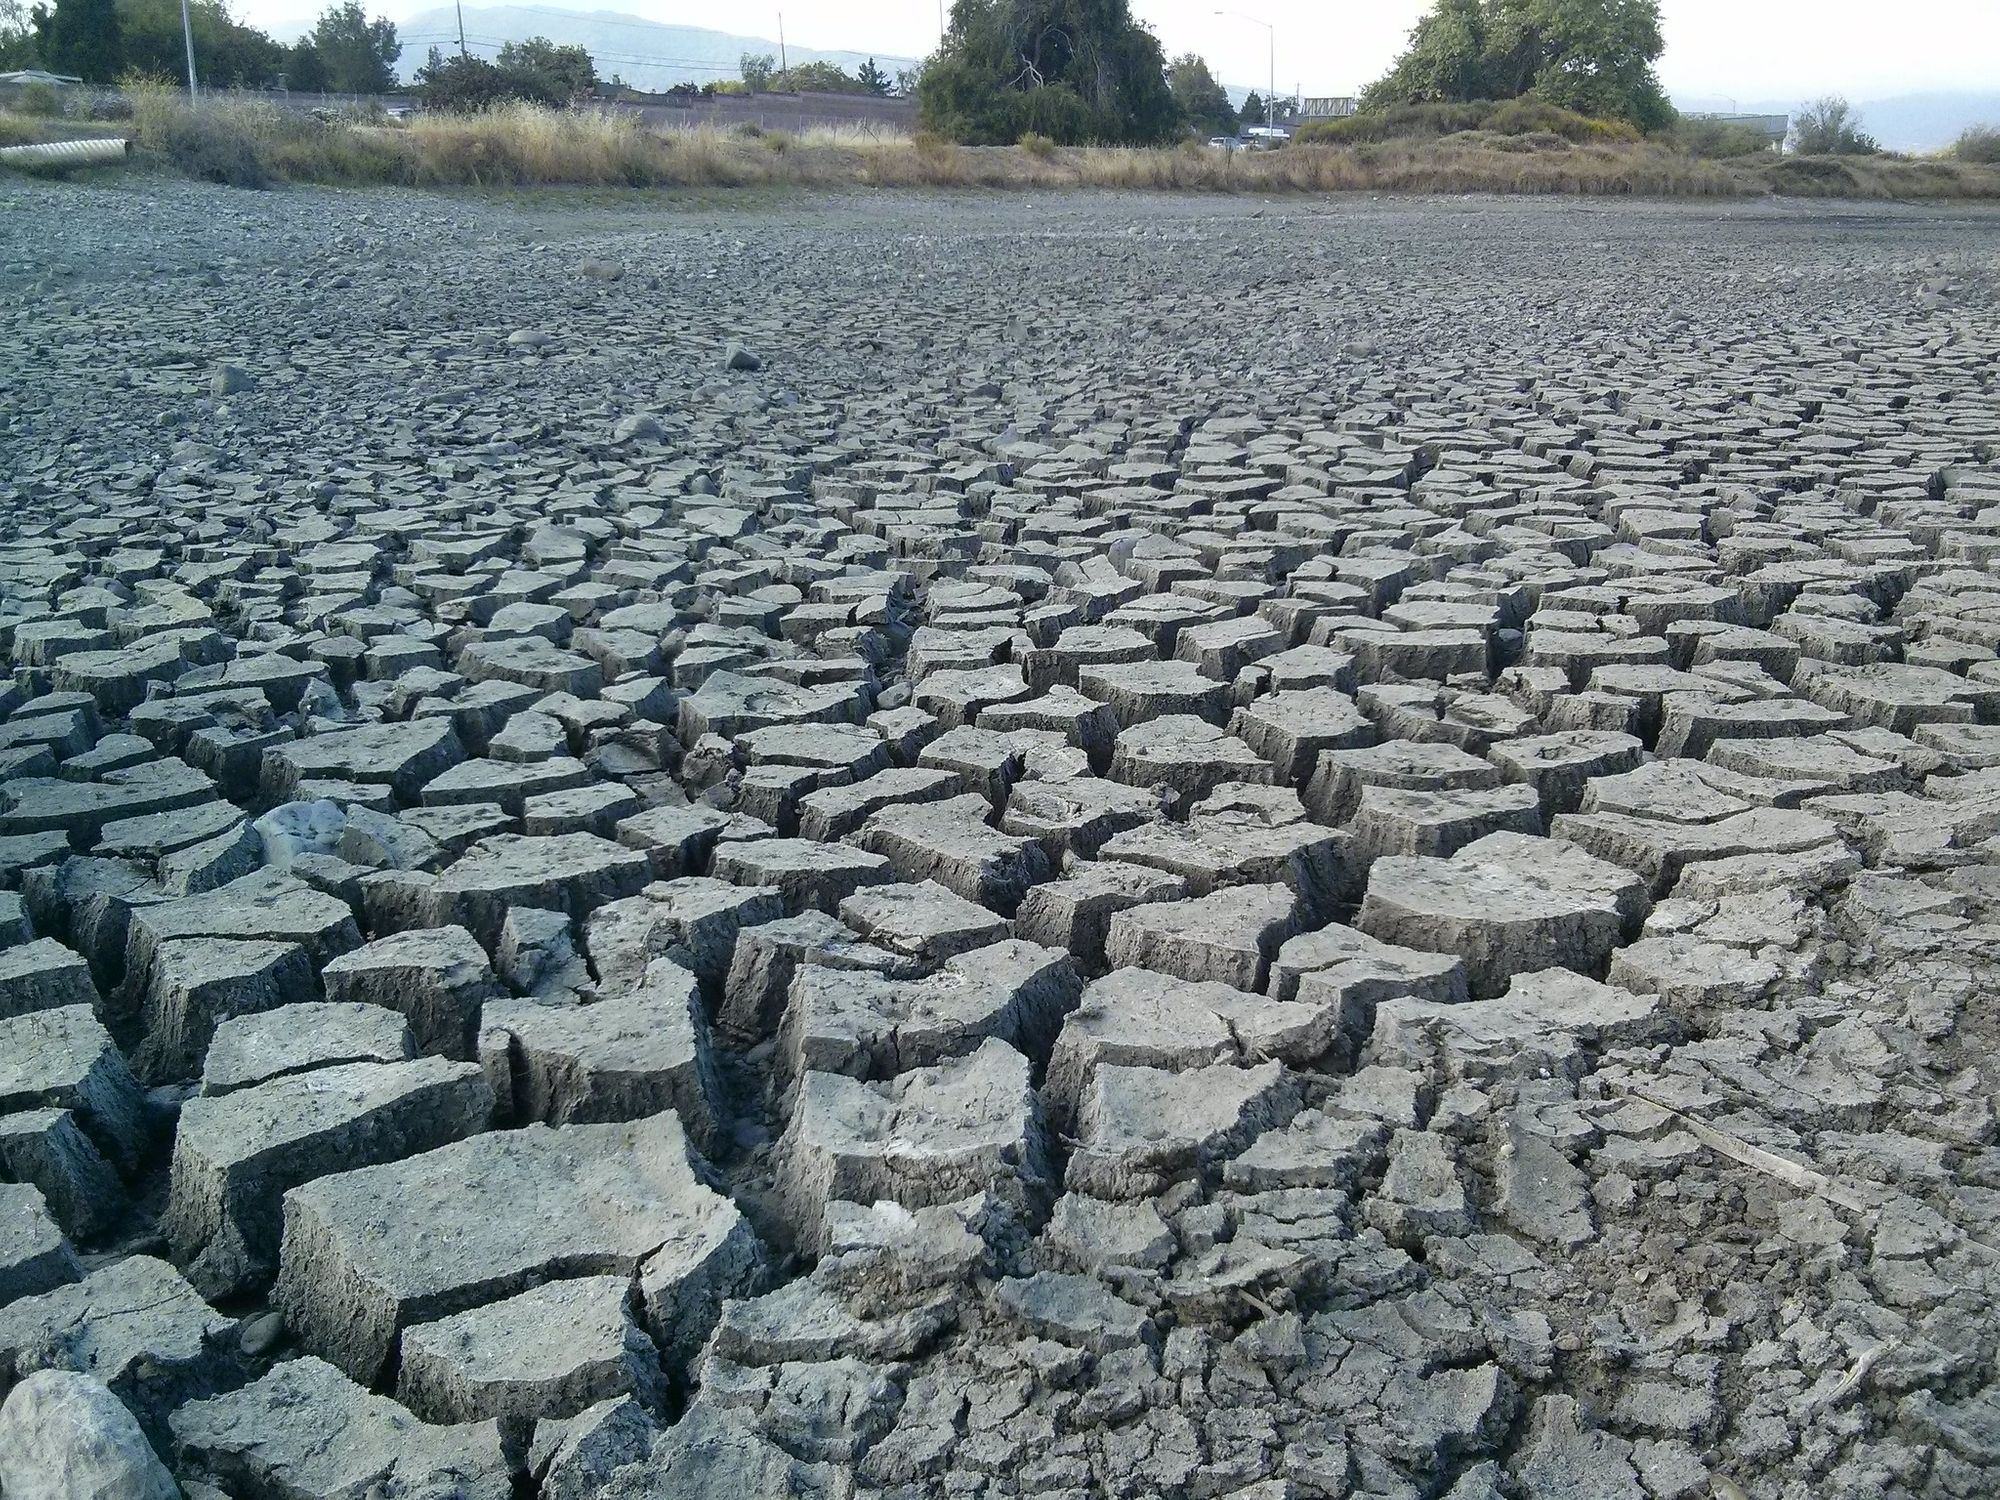 After Driest February on Record, Is Another California Drought Inevitable?